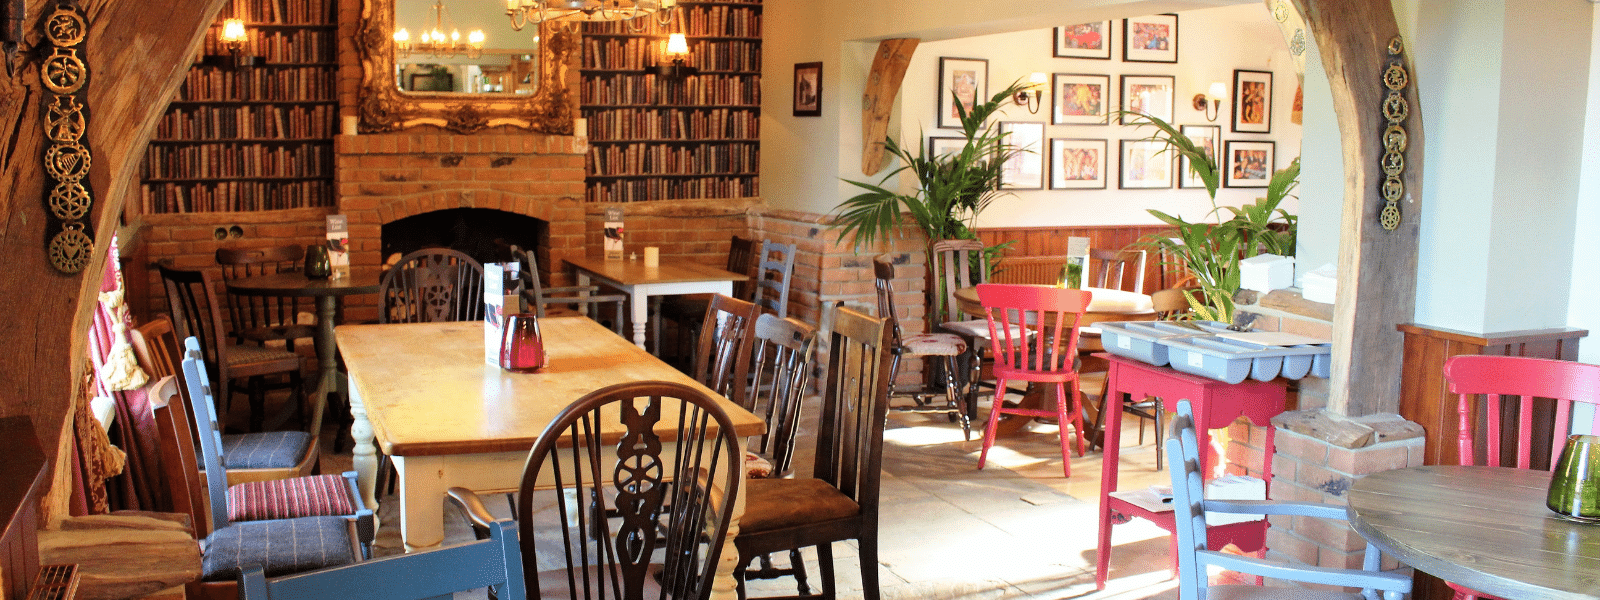 Events at the Coach and Horses